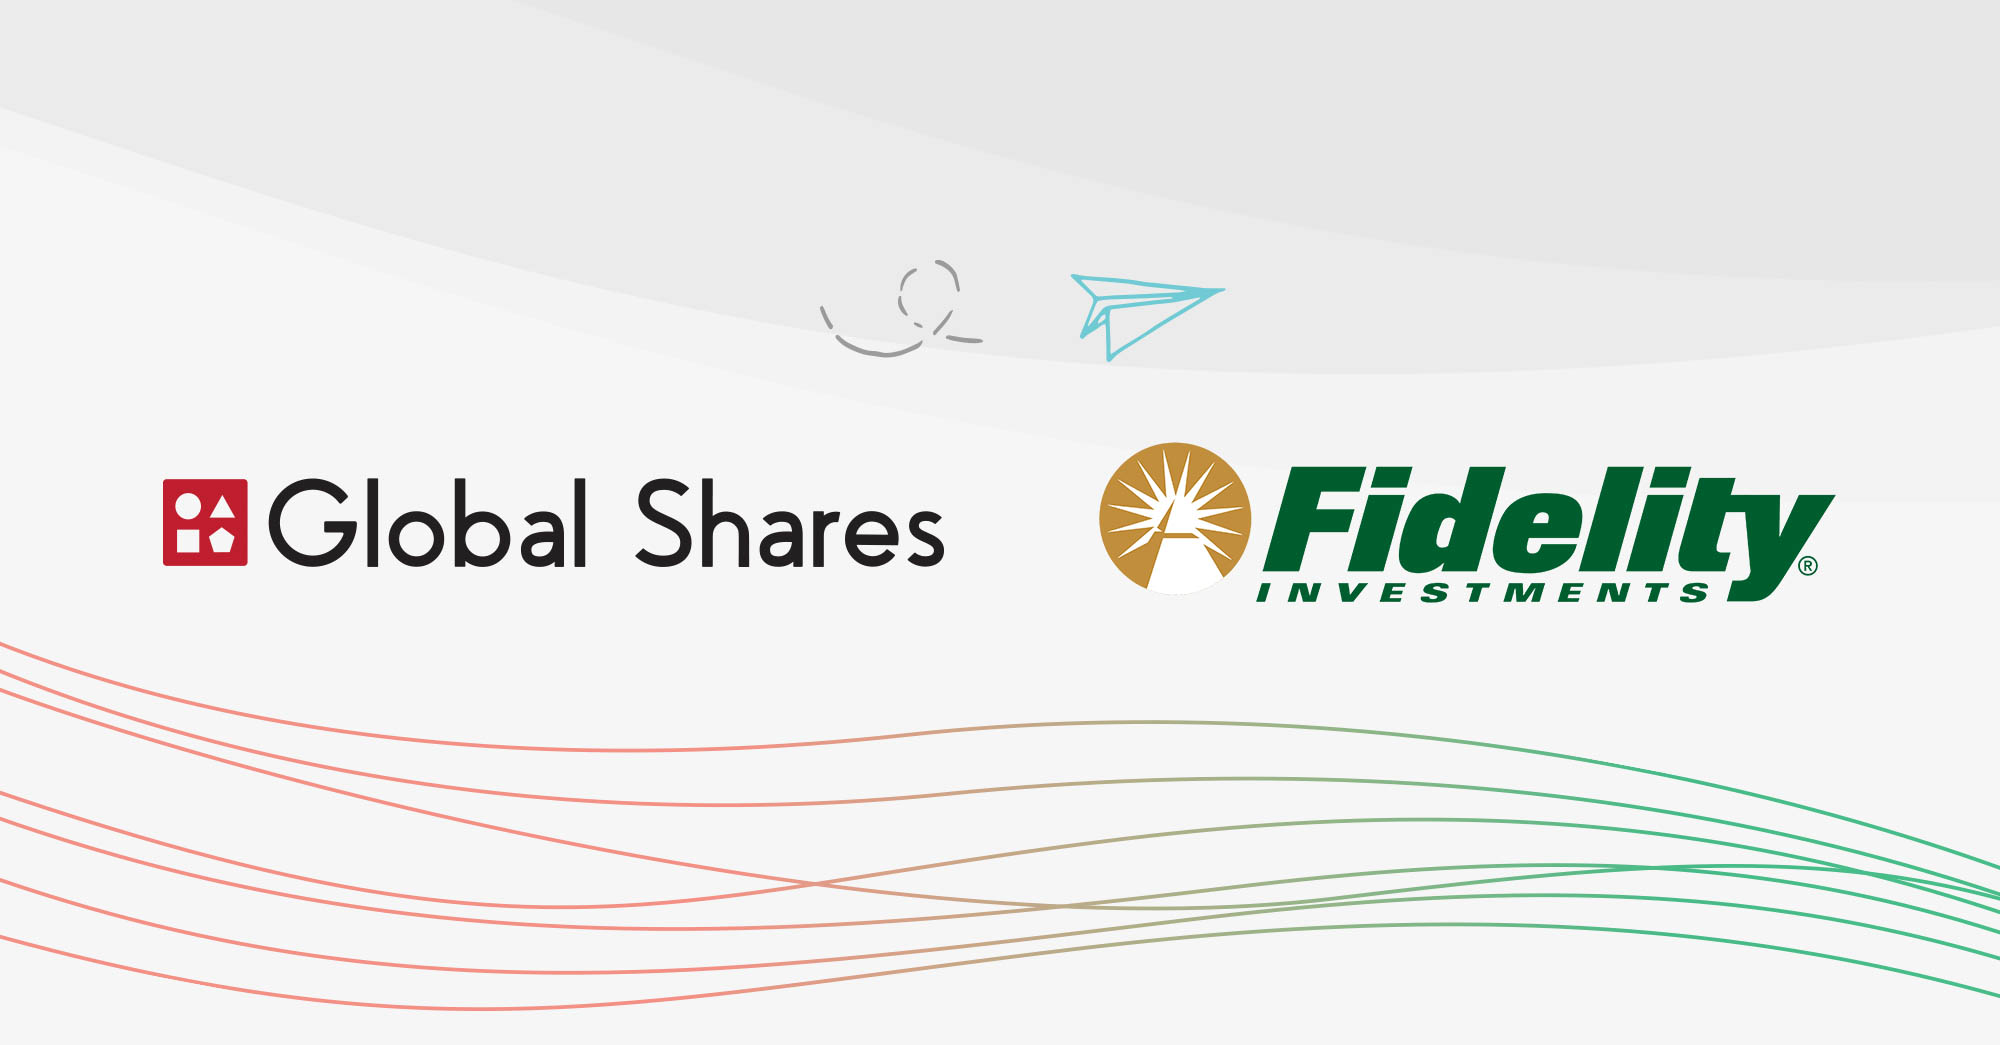 Global Shares & Fidelity Join Forces to Offer a New Cutting-Edge Integrated Stock Plan Solution